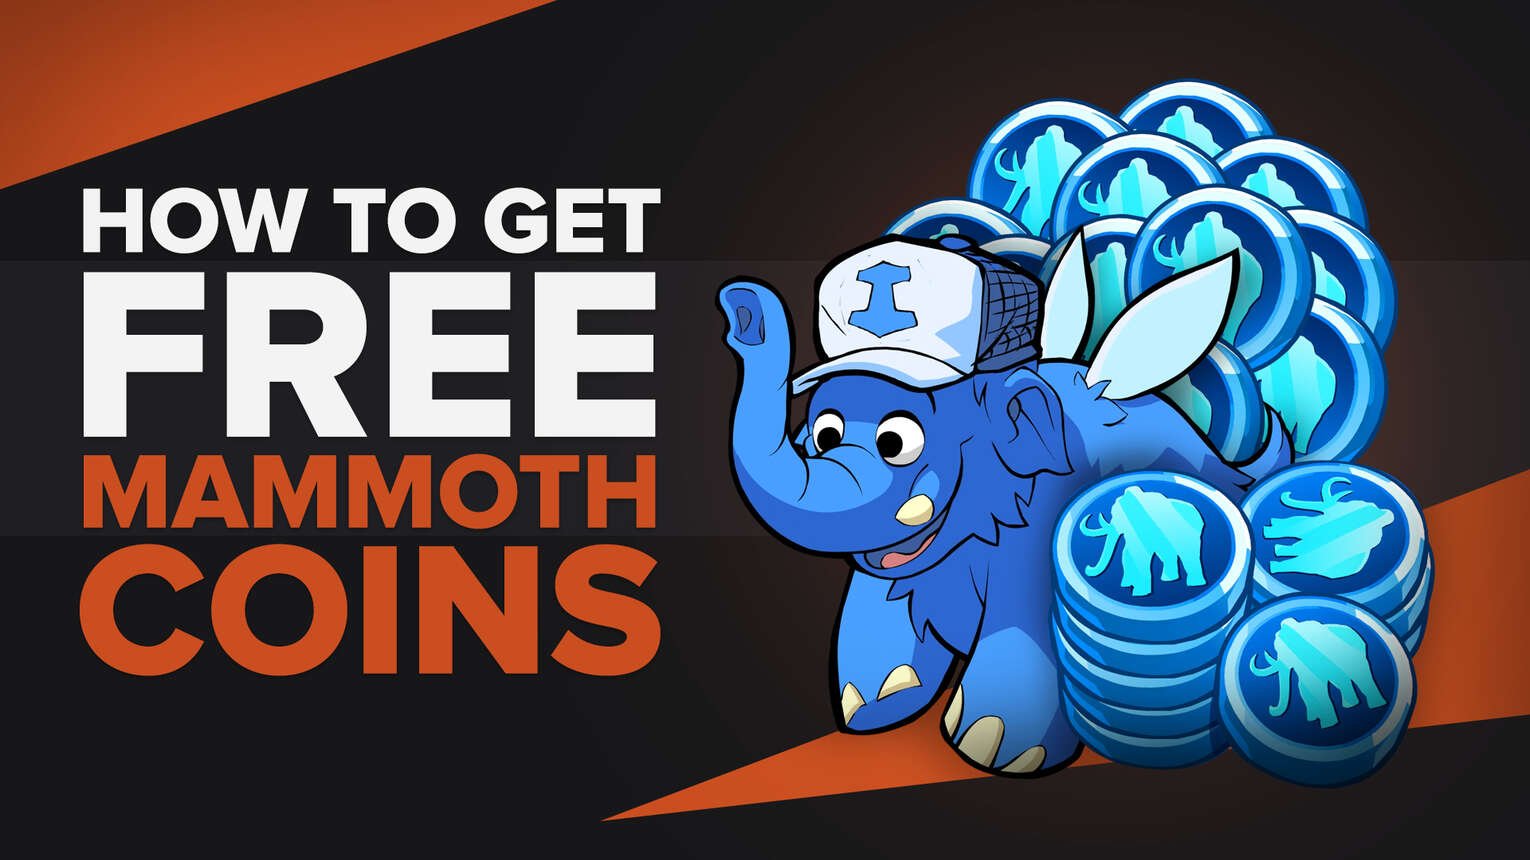 How To Get Free Mammoth Coins in Brawlhalla (2 Legit Ways)